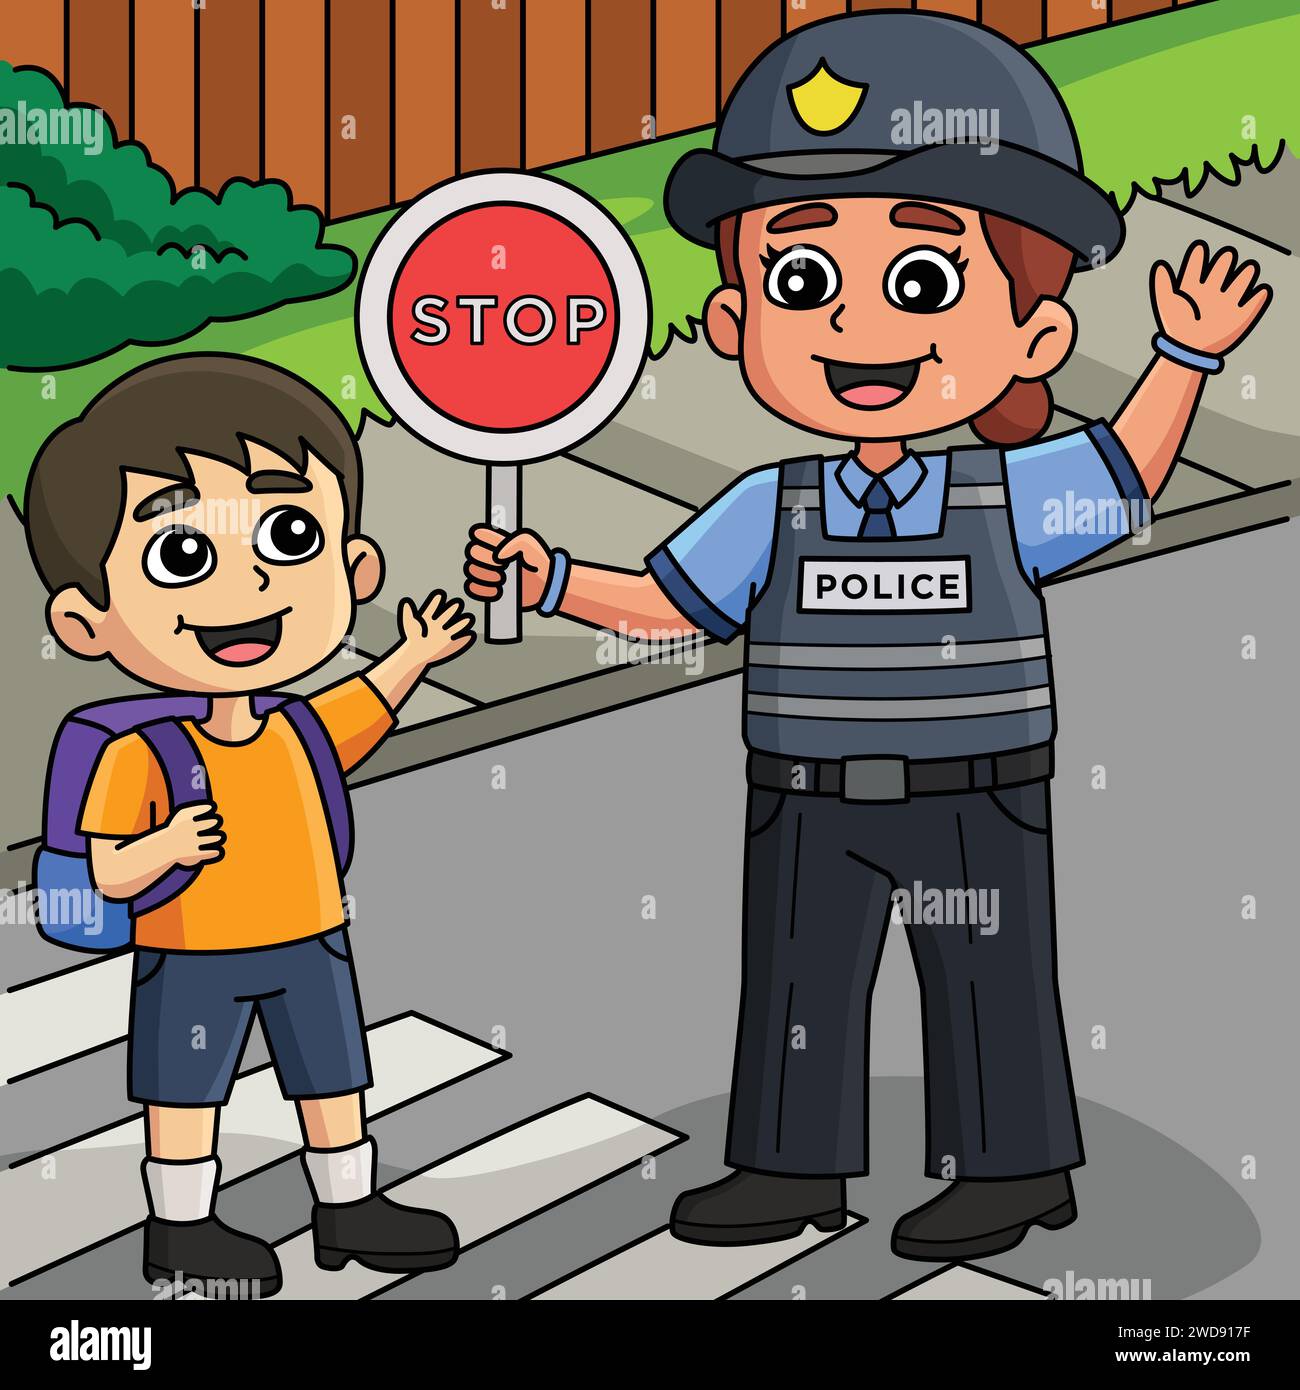 Police Traffic Officer helping Kid Colored Cartoon Stock Vector